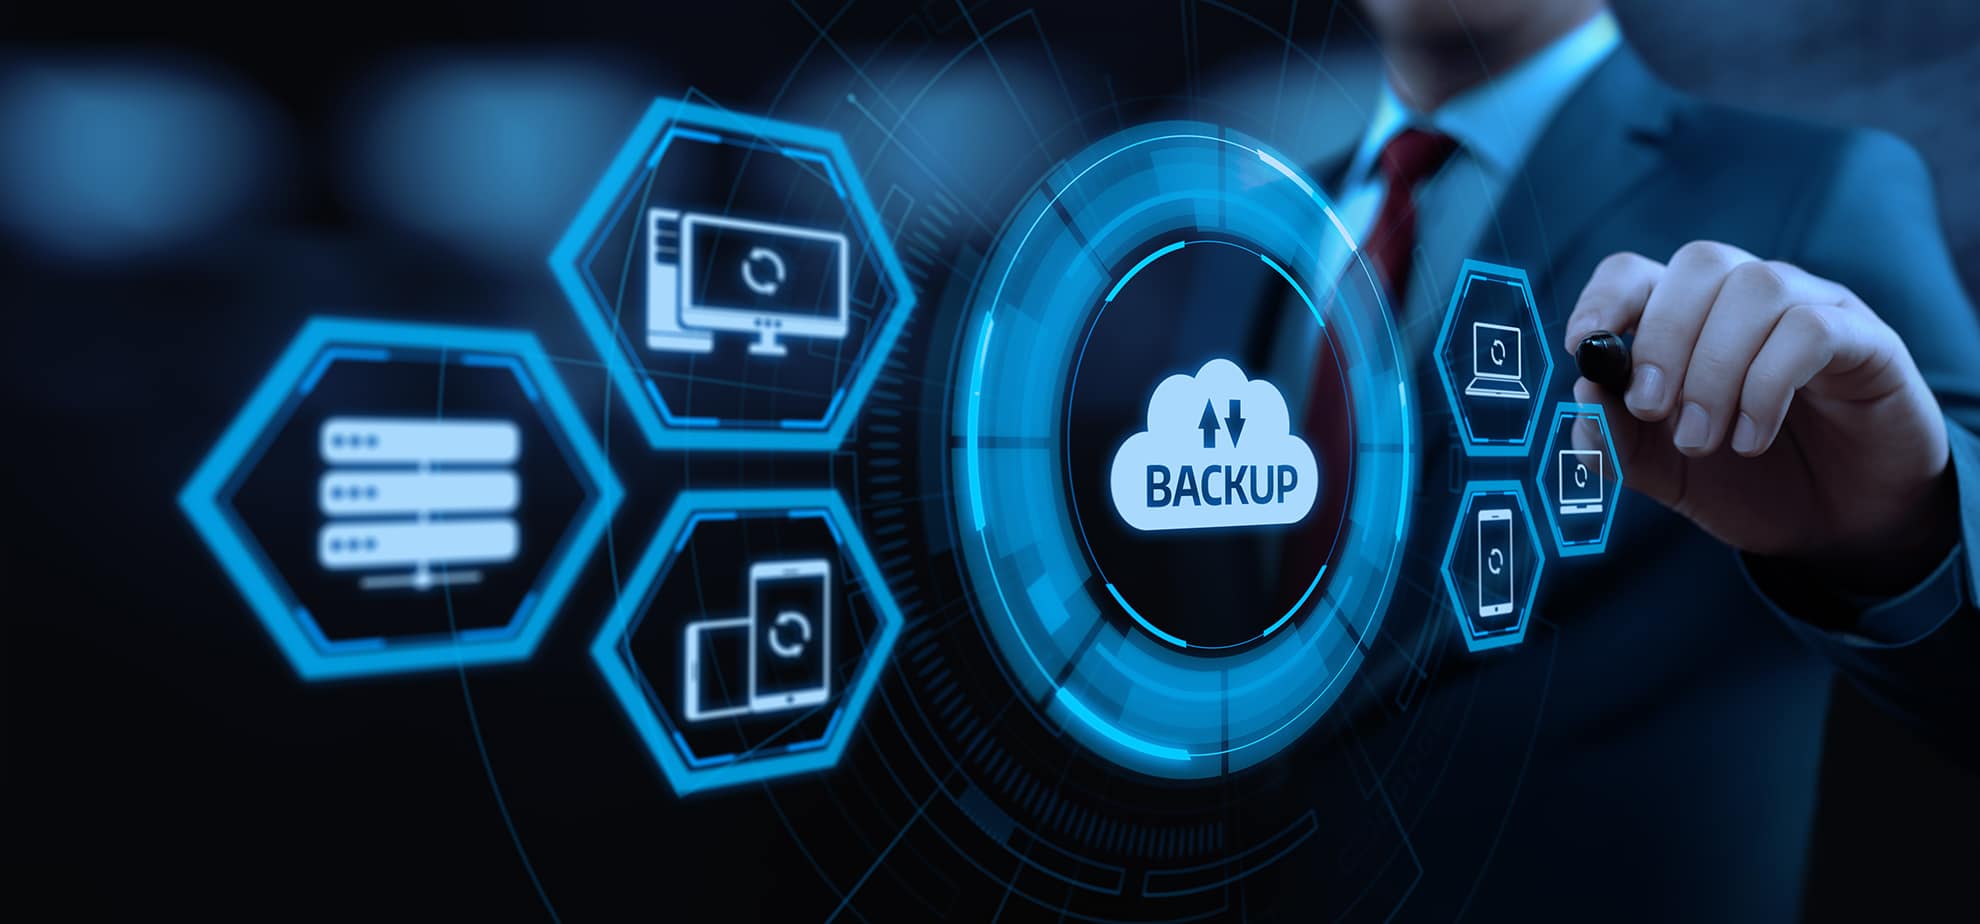 Virtualization backup and DR solution